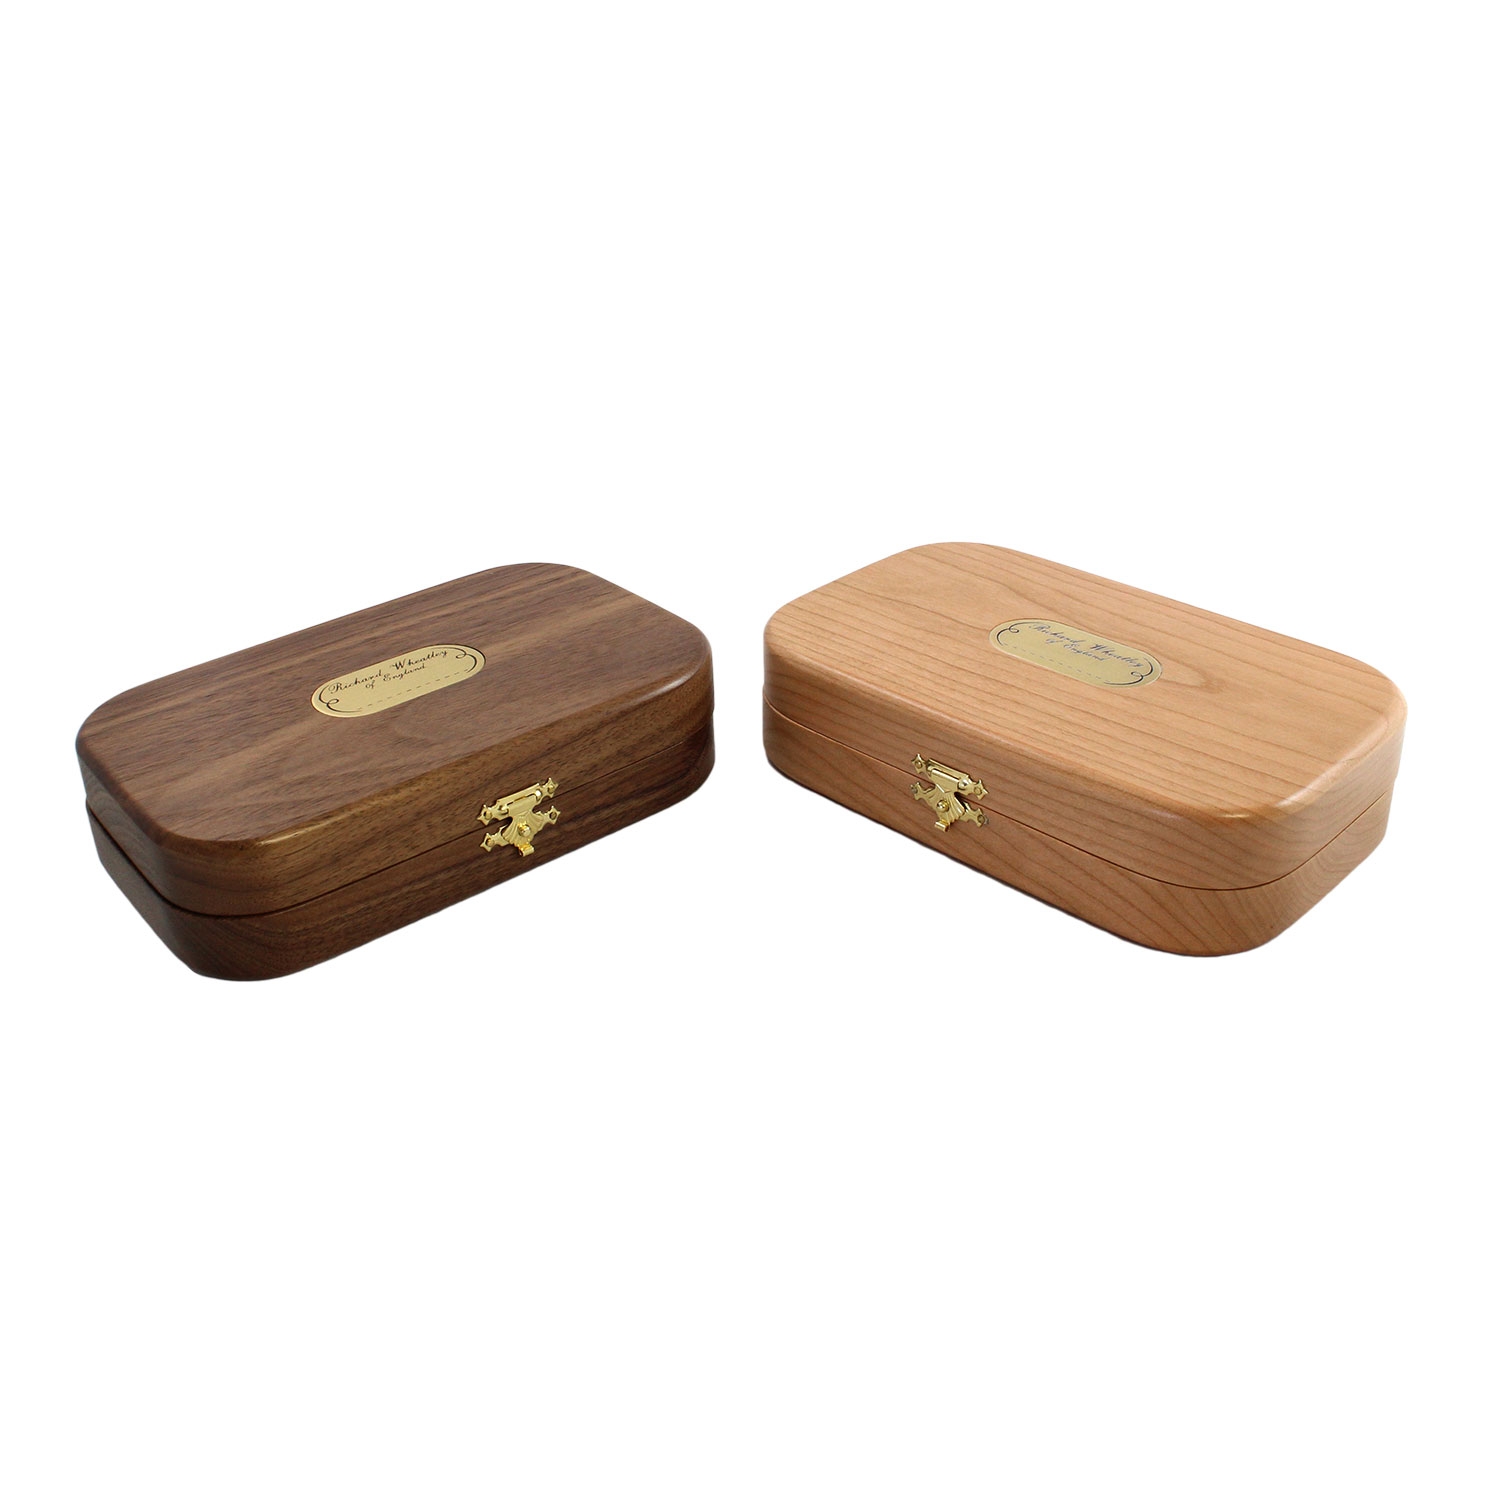 Richard Wheatley Deluxe Wooden Fly Boxes